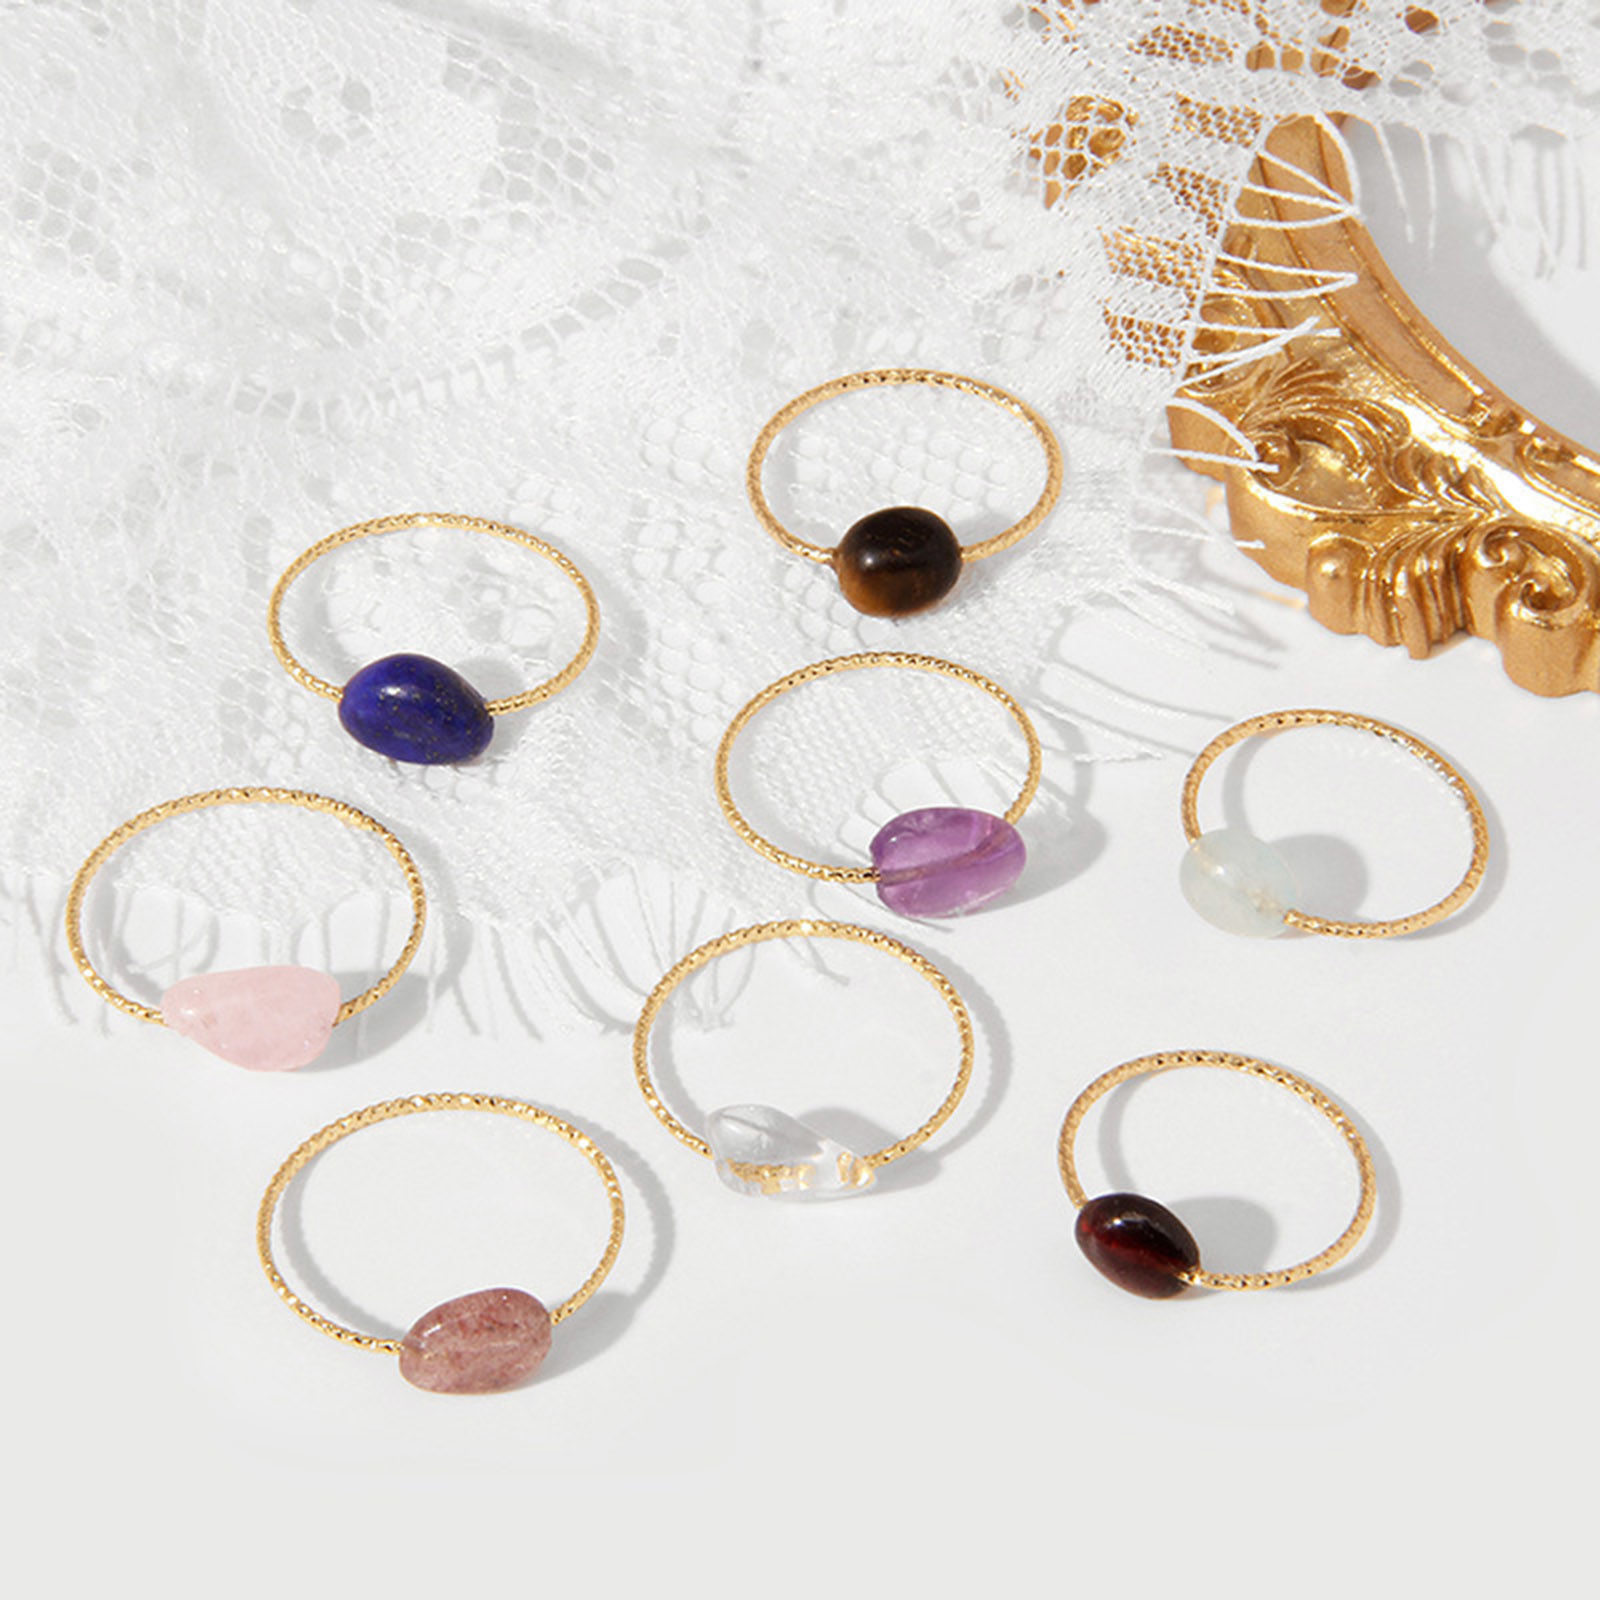 Picture of Stone ( Mix ) Unadjustable Simple Rings Gold Plated Gold Plated Irregular 18mm(US Size 7.75), 1 Piece